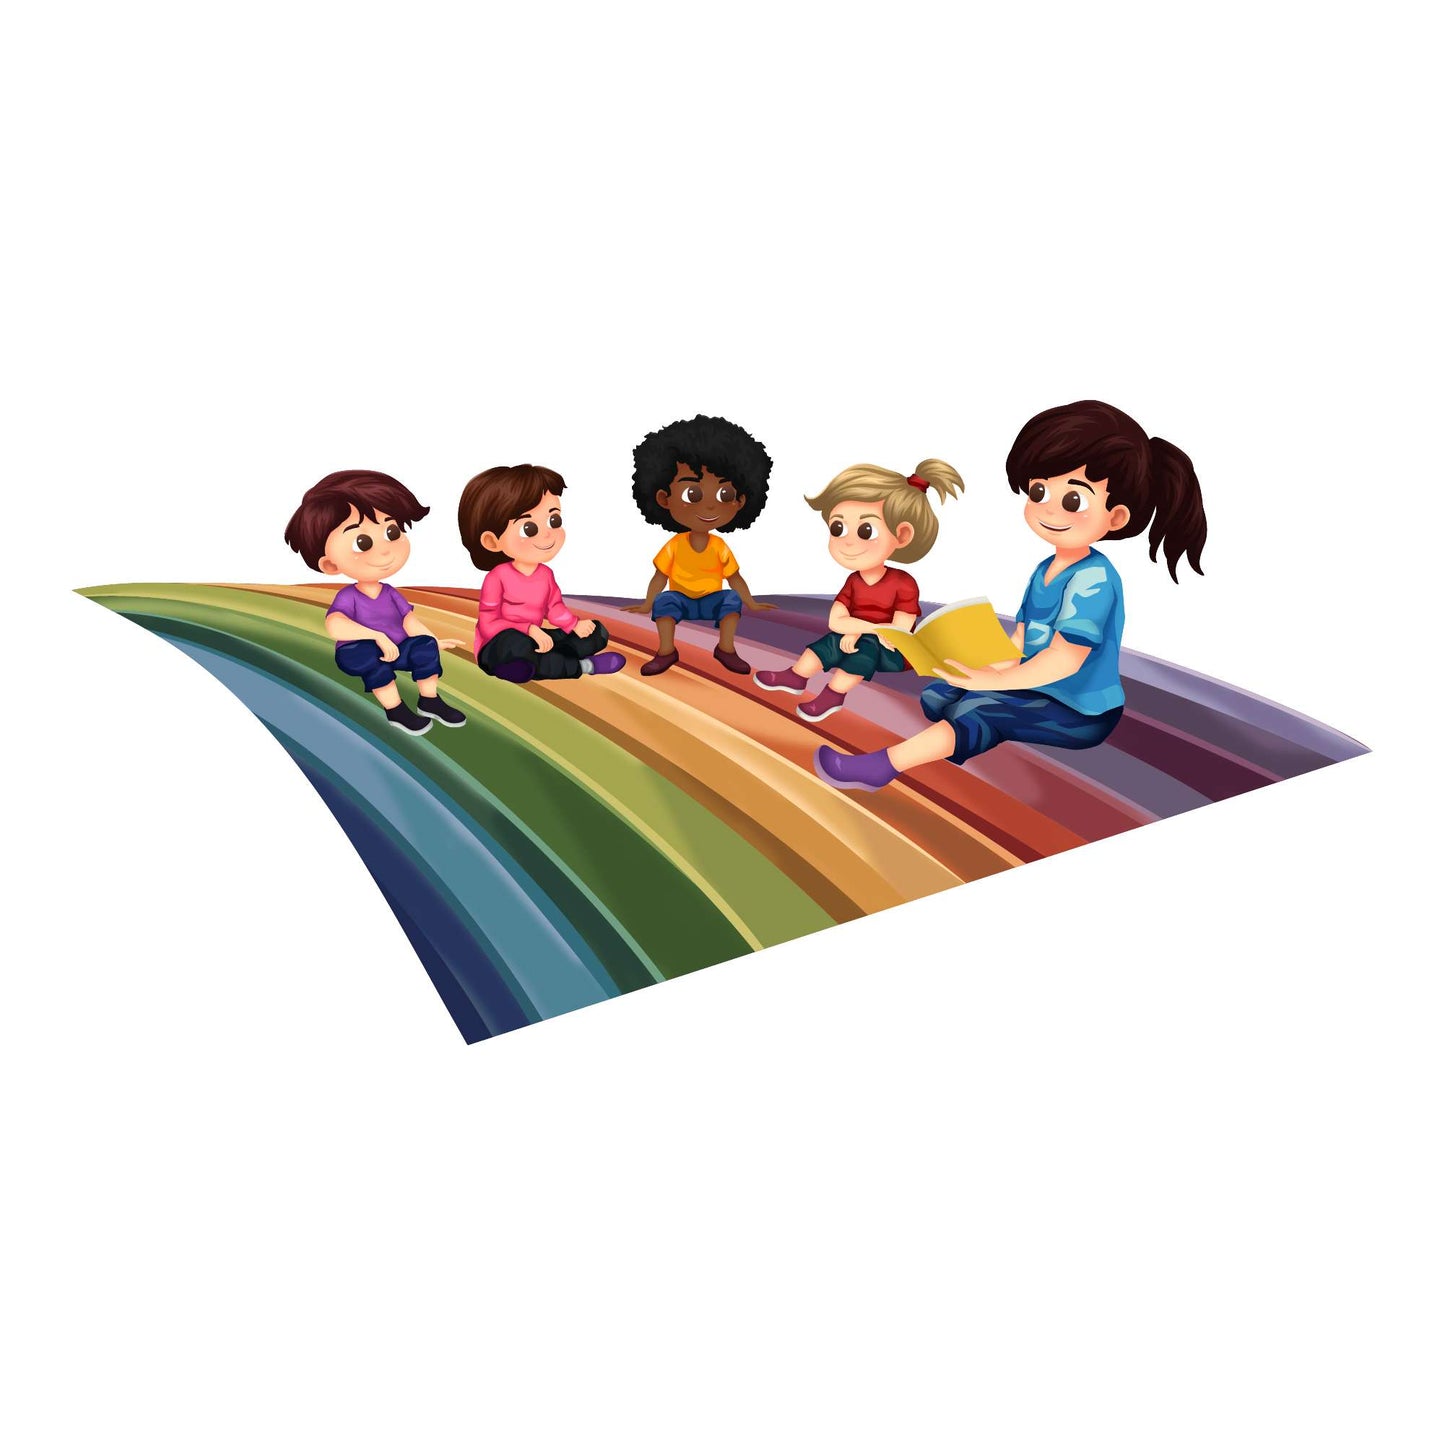 Design With Vinyl Playful Rainbow Wall Decal Cute Little Kids Playing On Rainbow Wall Design